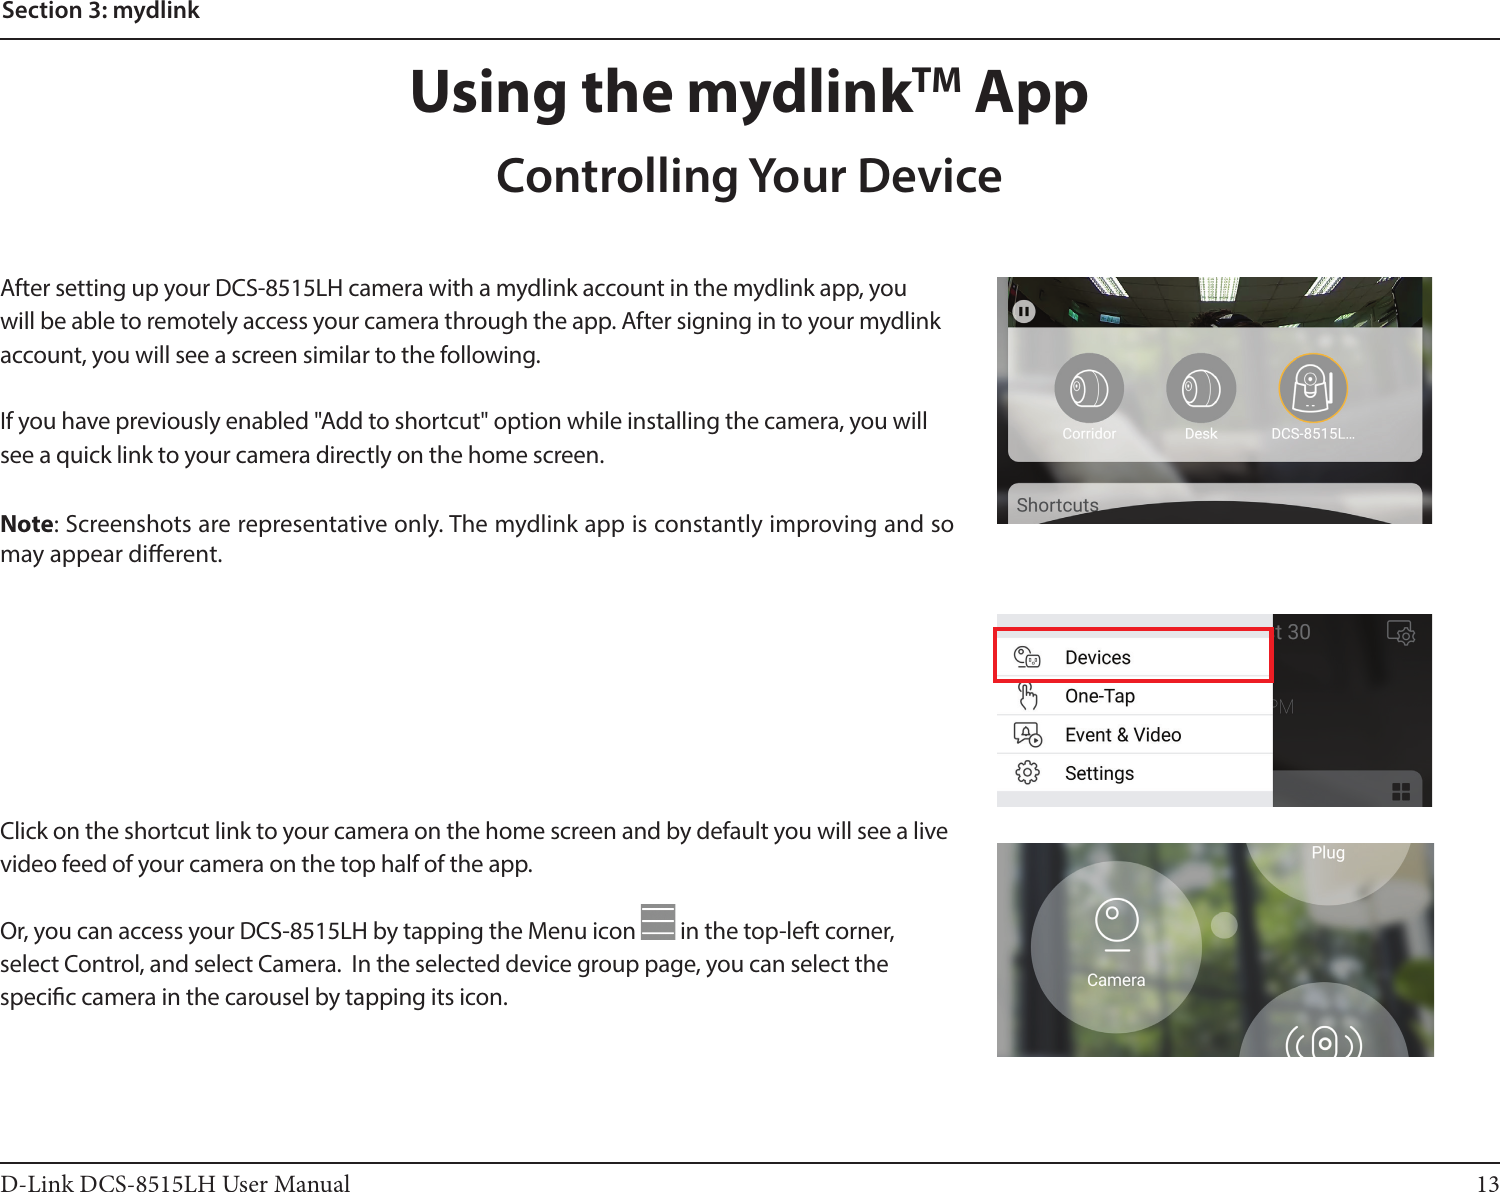 13D-Link DCS-8515LH User ManualSection 3: mydlinkAfter setting up your DCS-8515LH camera with a mydlink account in the mydlink app, you will be able to remotely access your camera through the app. After signing in to your mydlink account, you will see a screen similar to the following.If you have previously enabled &quot;Add to shortcut&quot; option while installing the camera, you will see a quick link to your camera directly on the home screen.Note: Screenshots are representative only. The mydlink app is constantly improving and so may appear dierent.Using the mydlinkTM AppControlling Your DeviceClick on the shortcut link to your camera on the home screen and by default you will see a live video feed of your camera on the top half of the app.Or, you can access your DCS-8515LH by tapping the Menu icon   in the top-left corner, select Control, and select Camera.  In the selected device group page, you can select the specic camera in the carousel by tapping its icon.